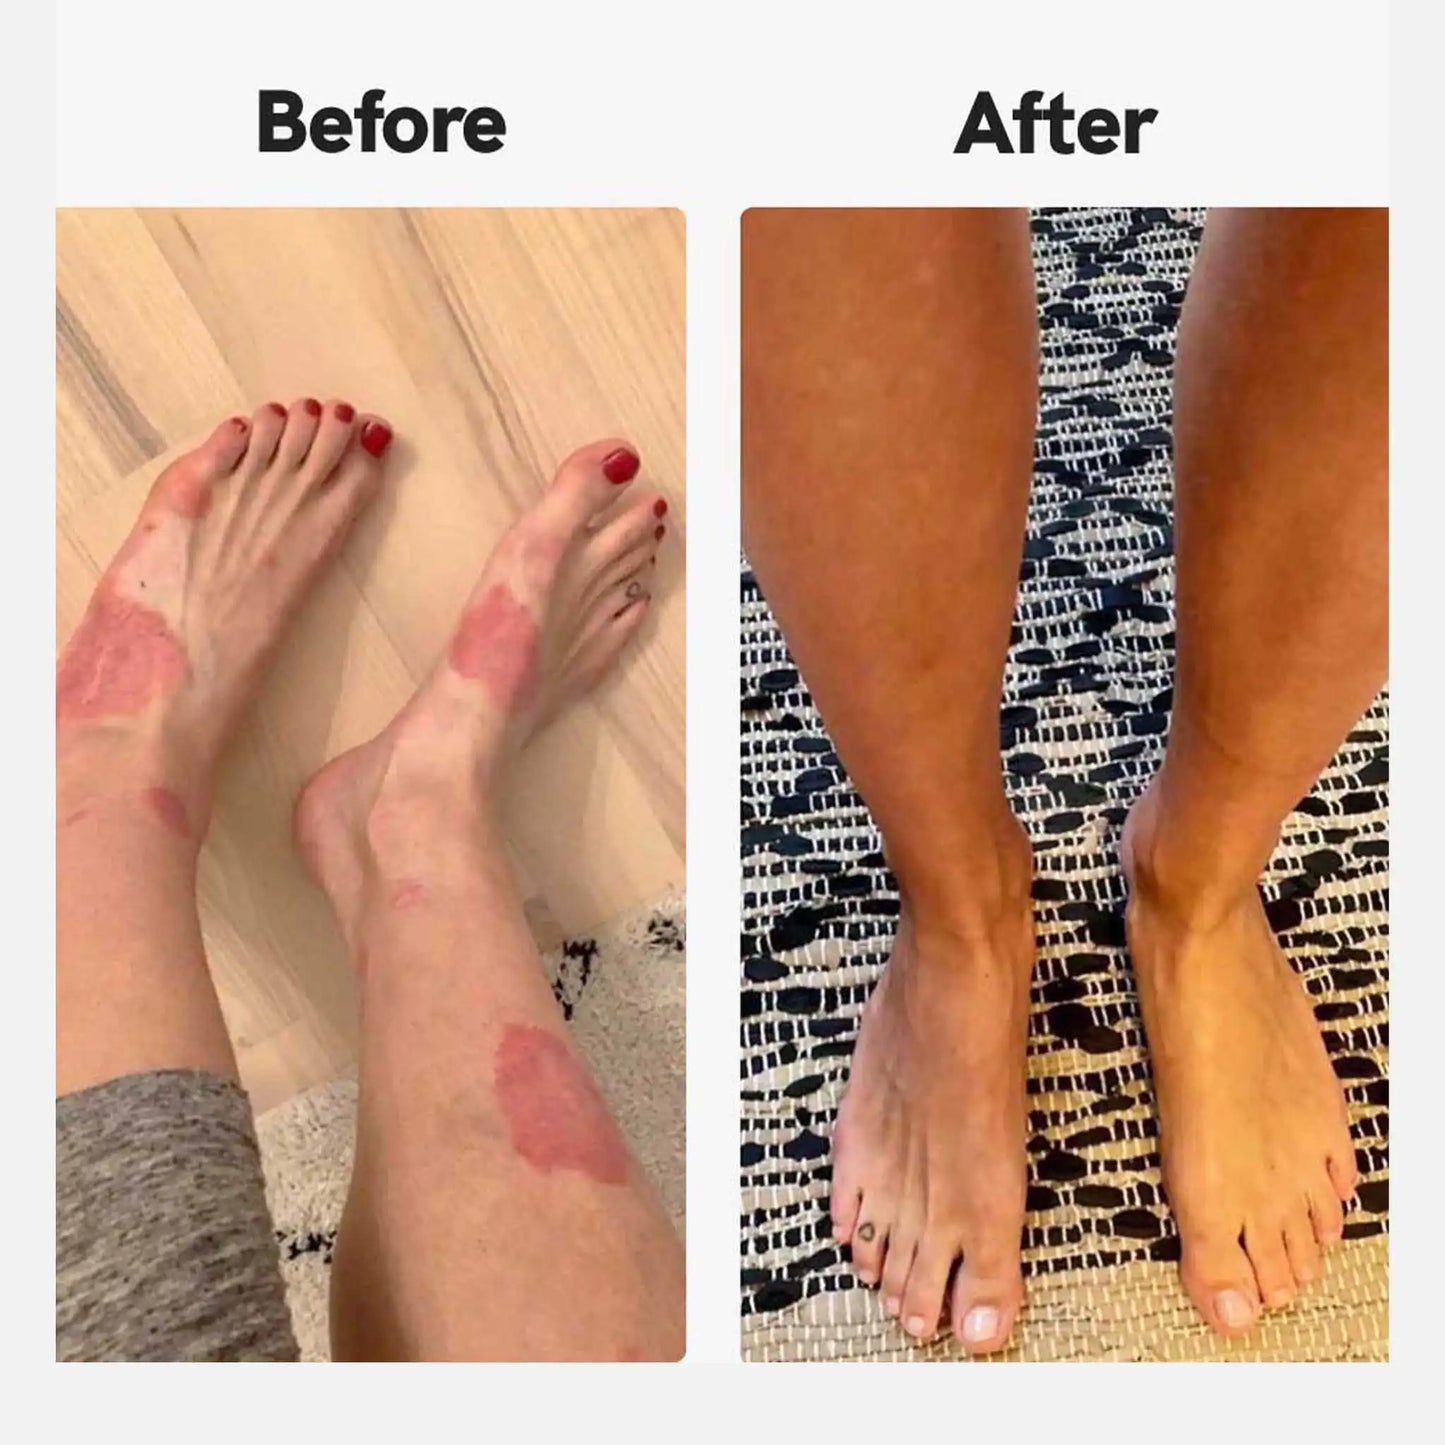 Results from customers using Nordic Oil's cbd cream for psoriasis